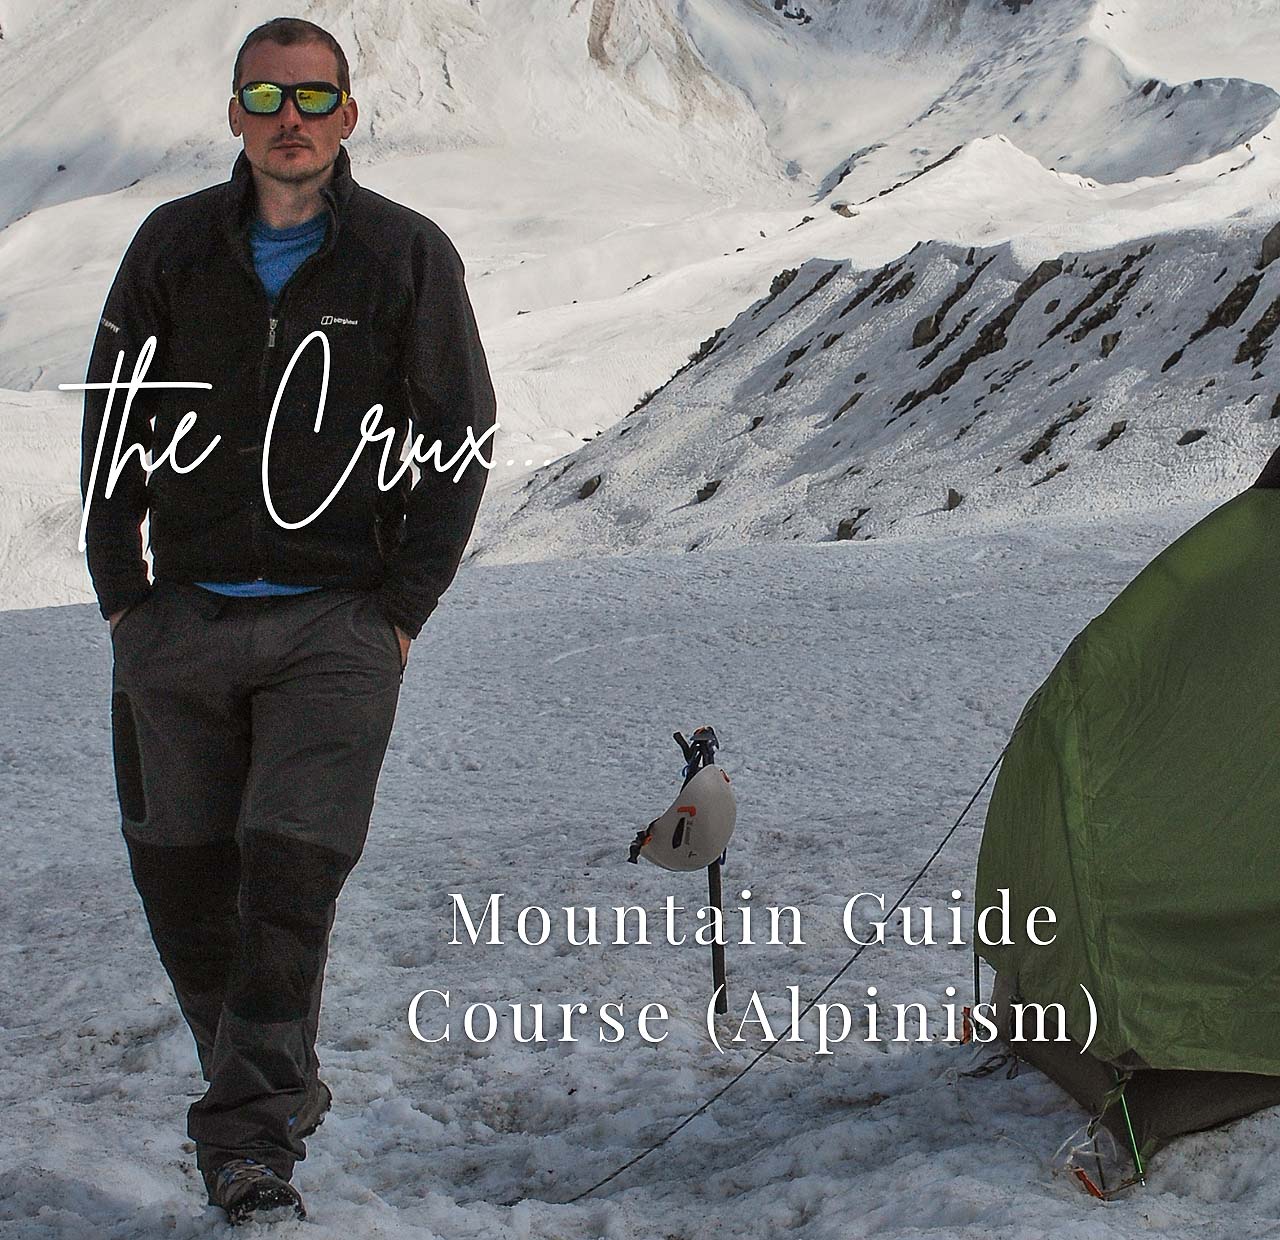 In a banner, a client walks on a glacier with his hands in his pockets, wearing sunglasses and an attitude. The crux mountain guide course alpinism is read out on the poster.